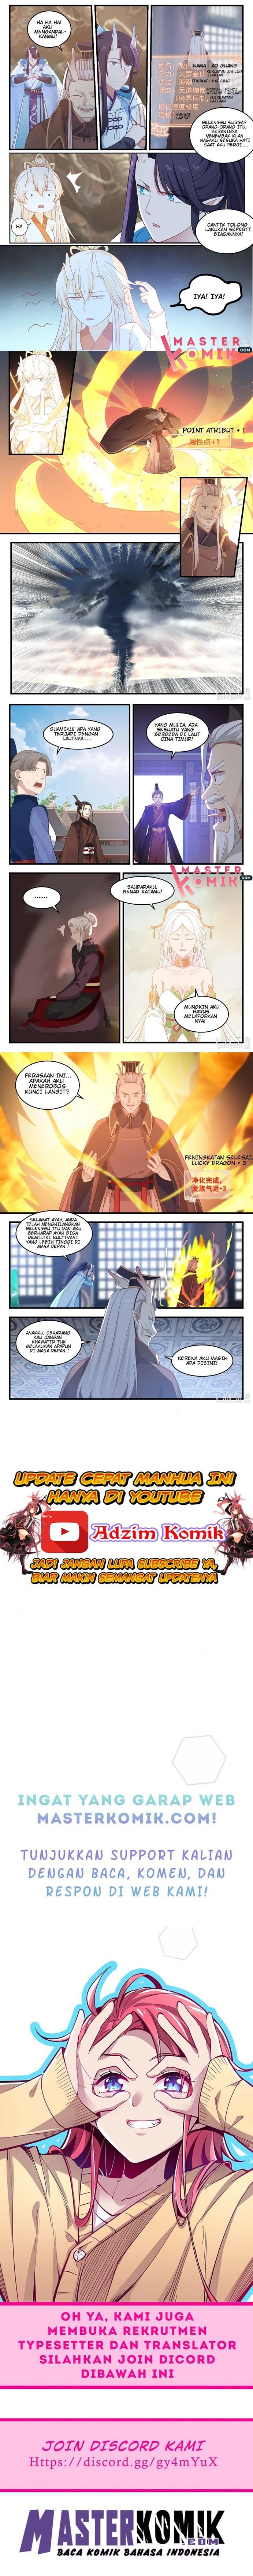 Dragon Throne Chapter 18